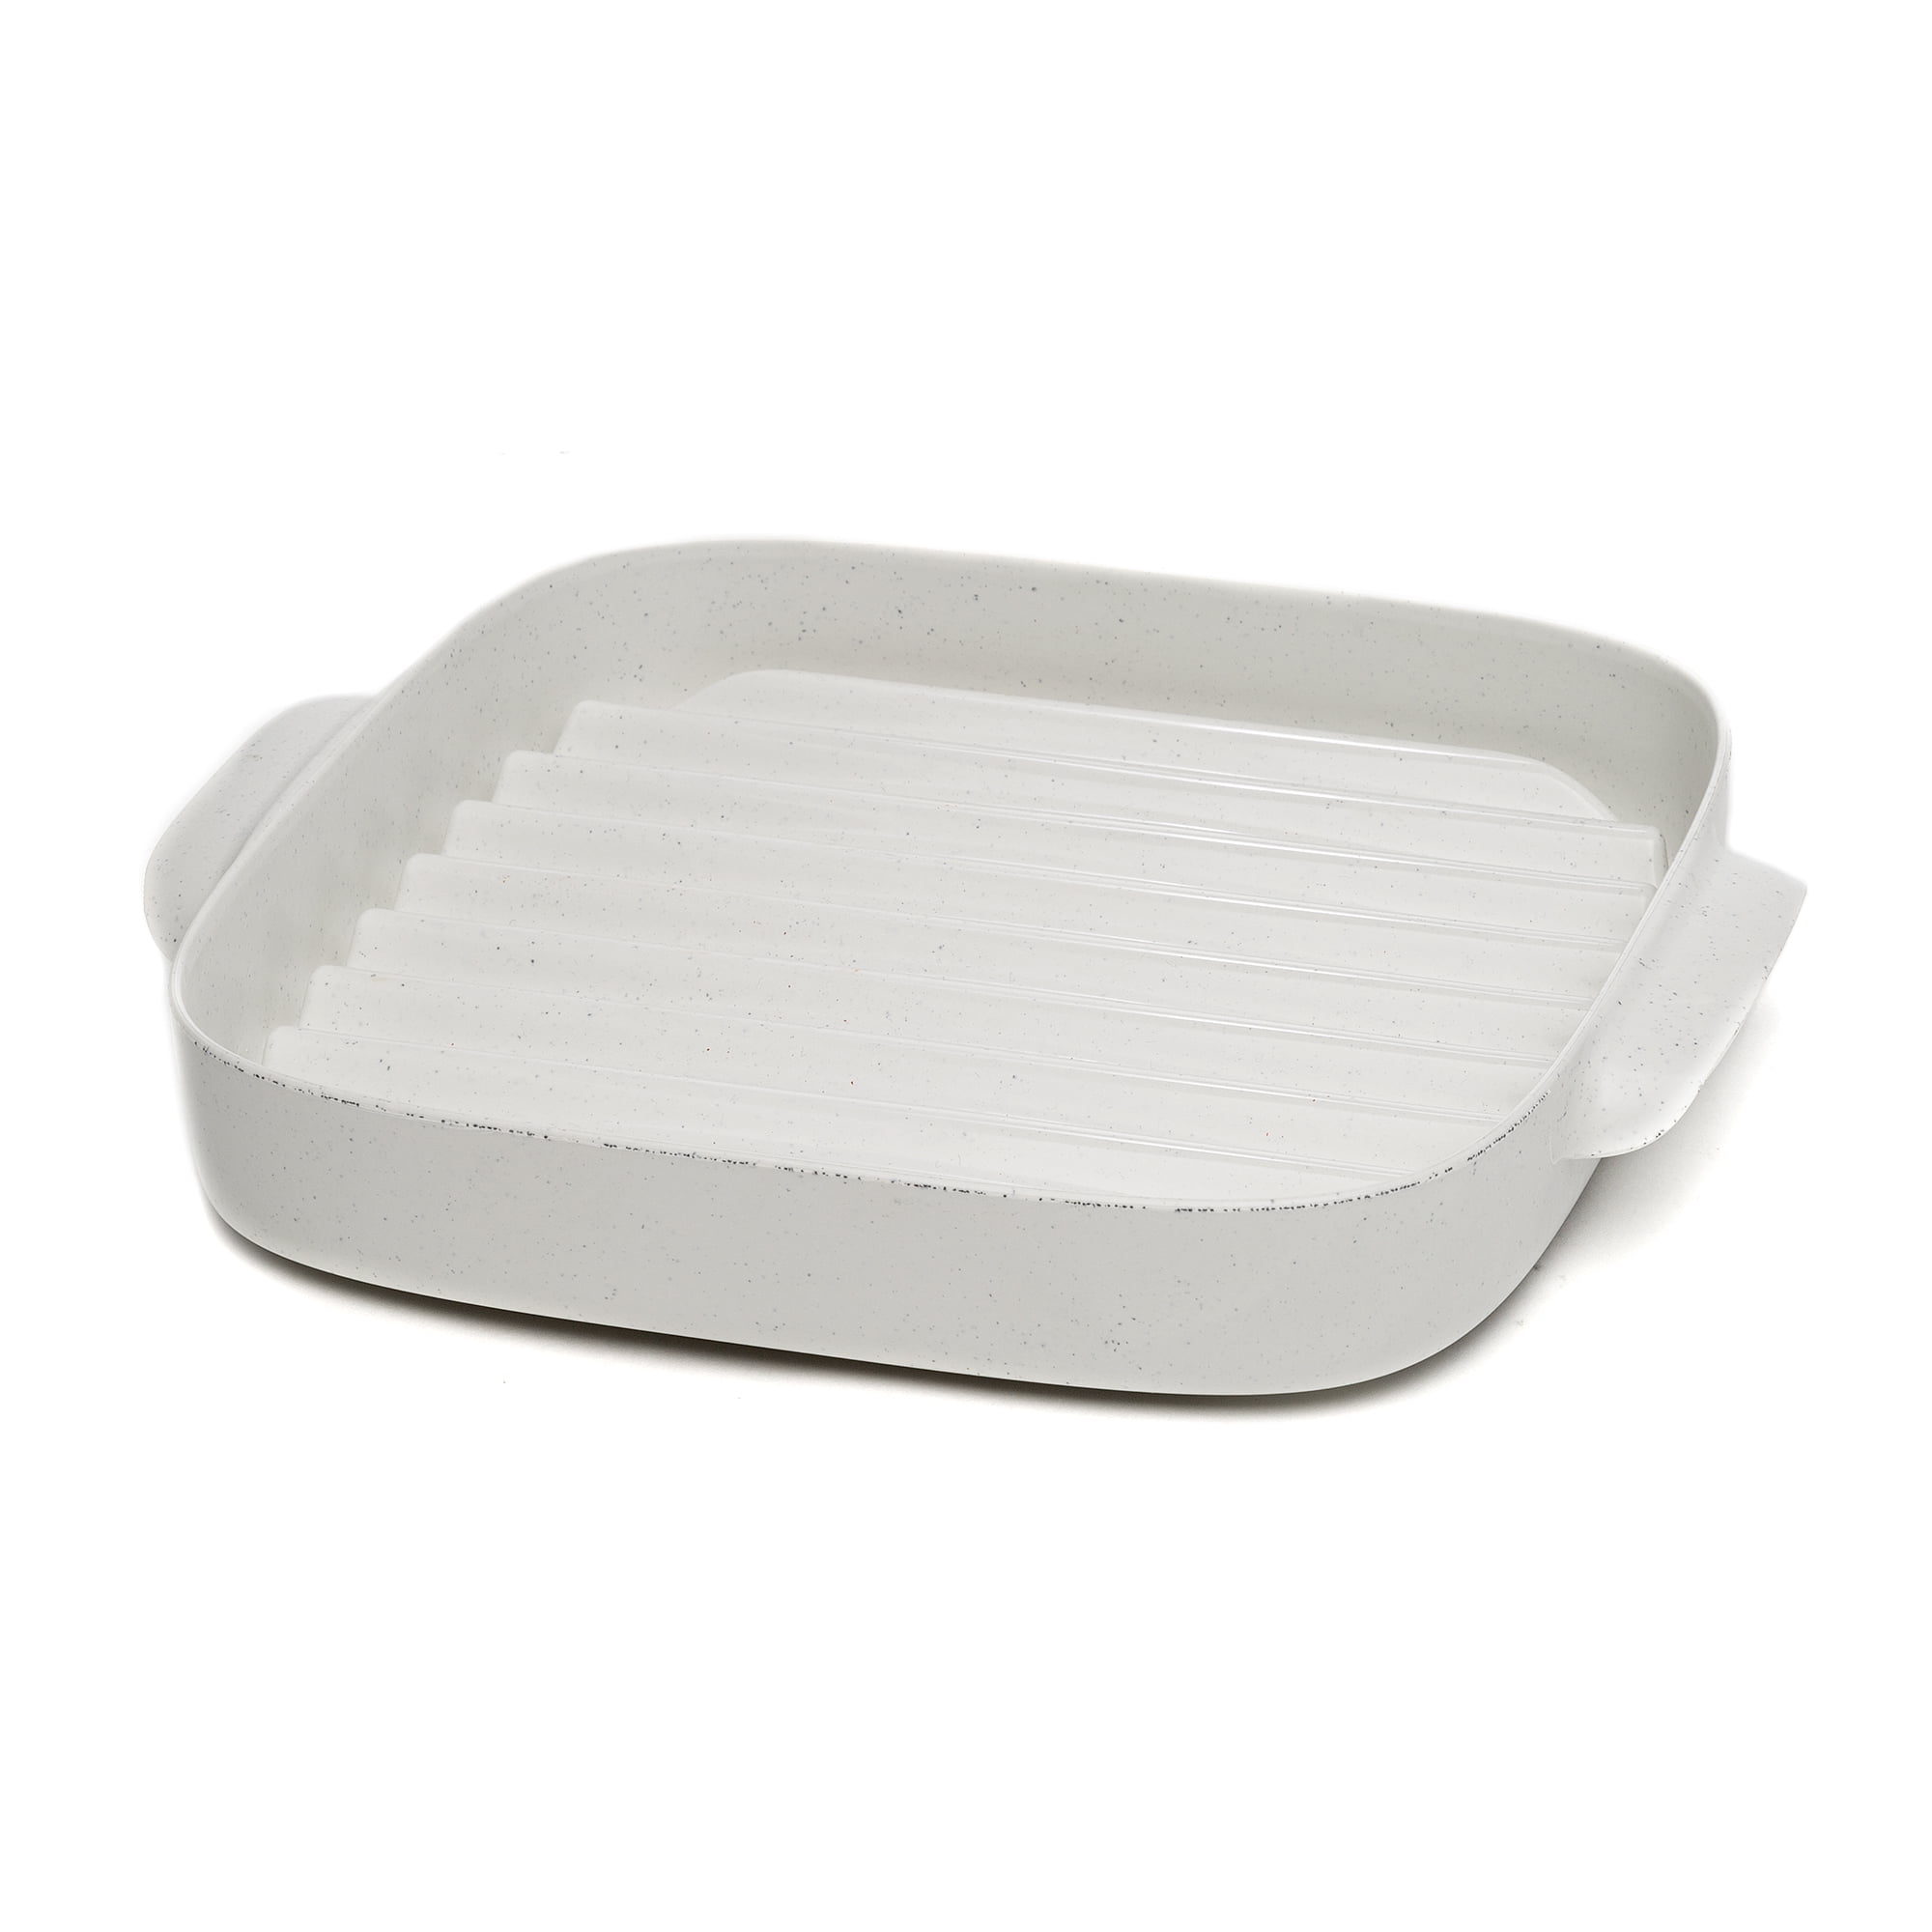 Nordic Ware Microwave Safe Bacon Tray & Food Defroster - White, 1 Piece -  Kroger